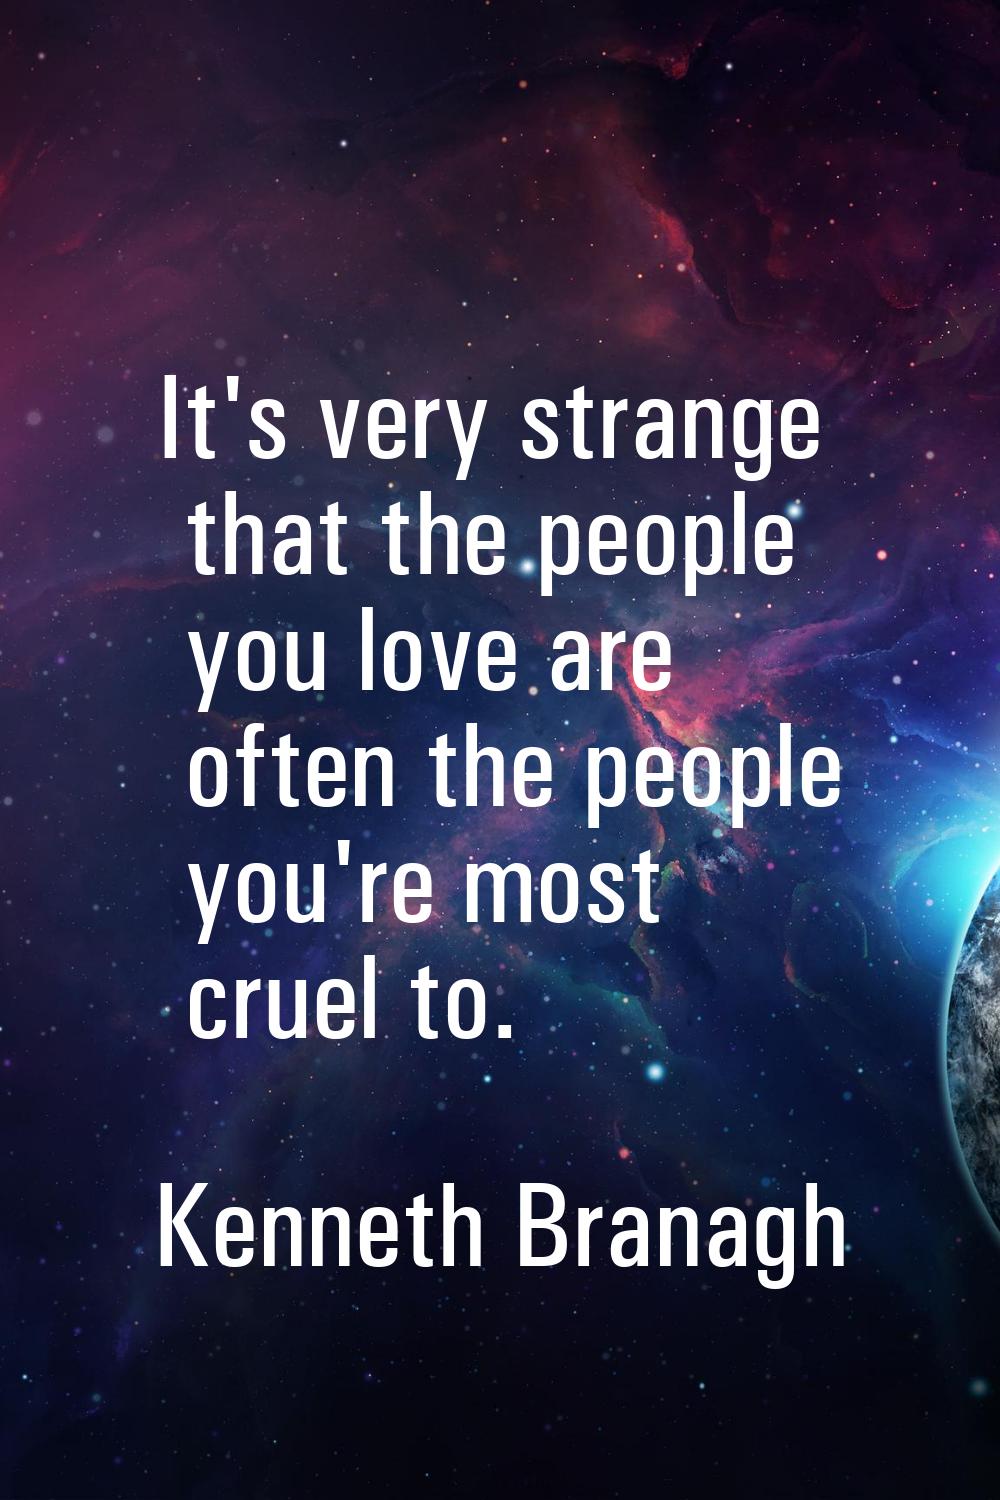 It's very strange that the people you love are often the people you're most cruel to.